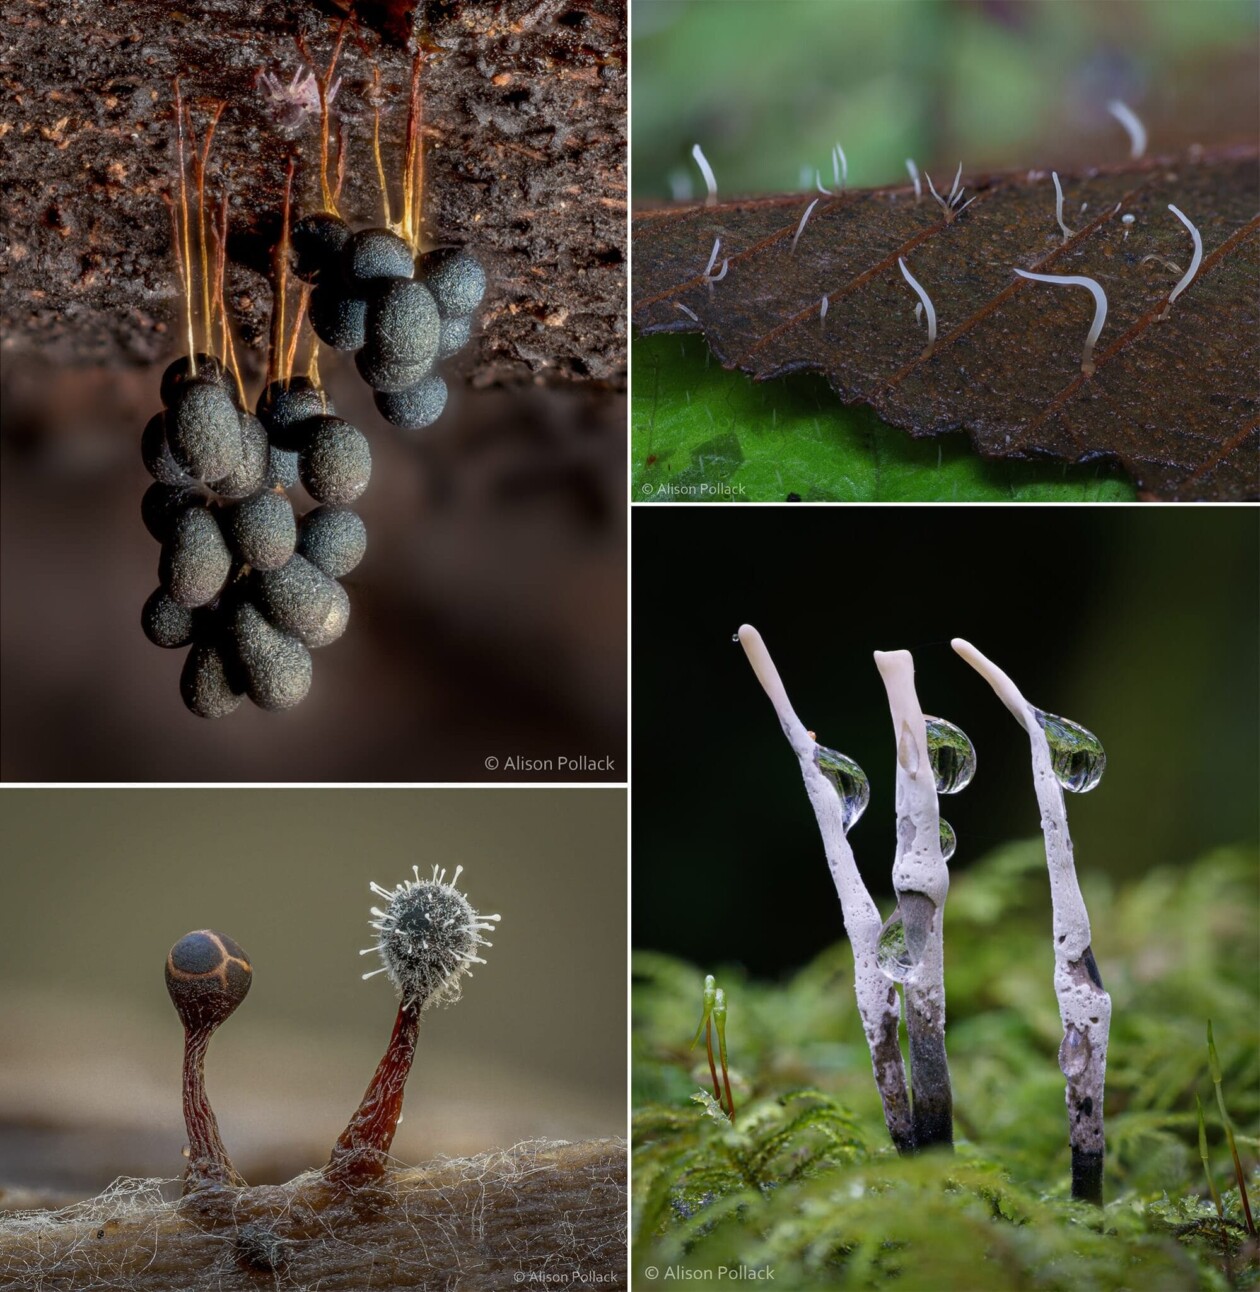 The Microscopic Majesty Of Mushrooms And Molds Captured By Alison Pollack (11)